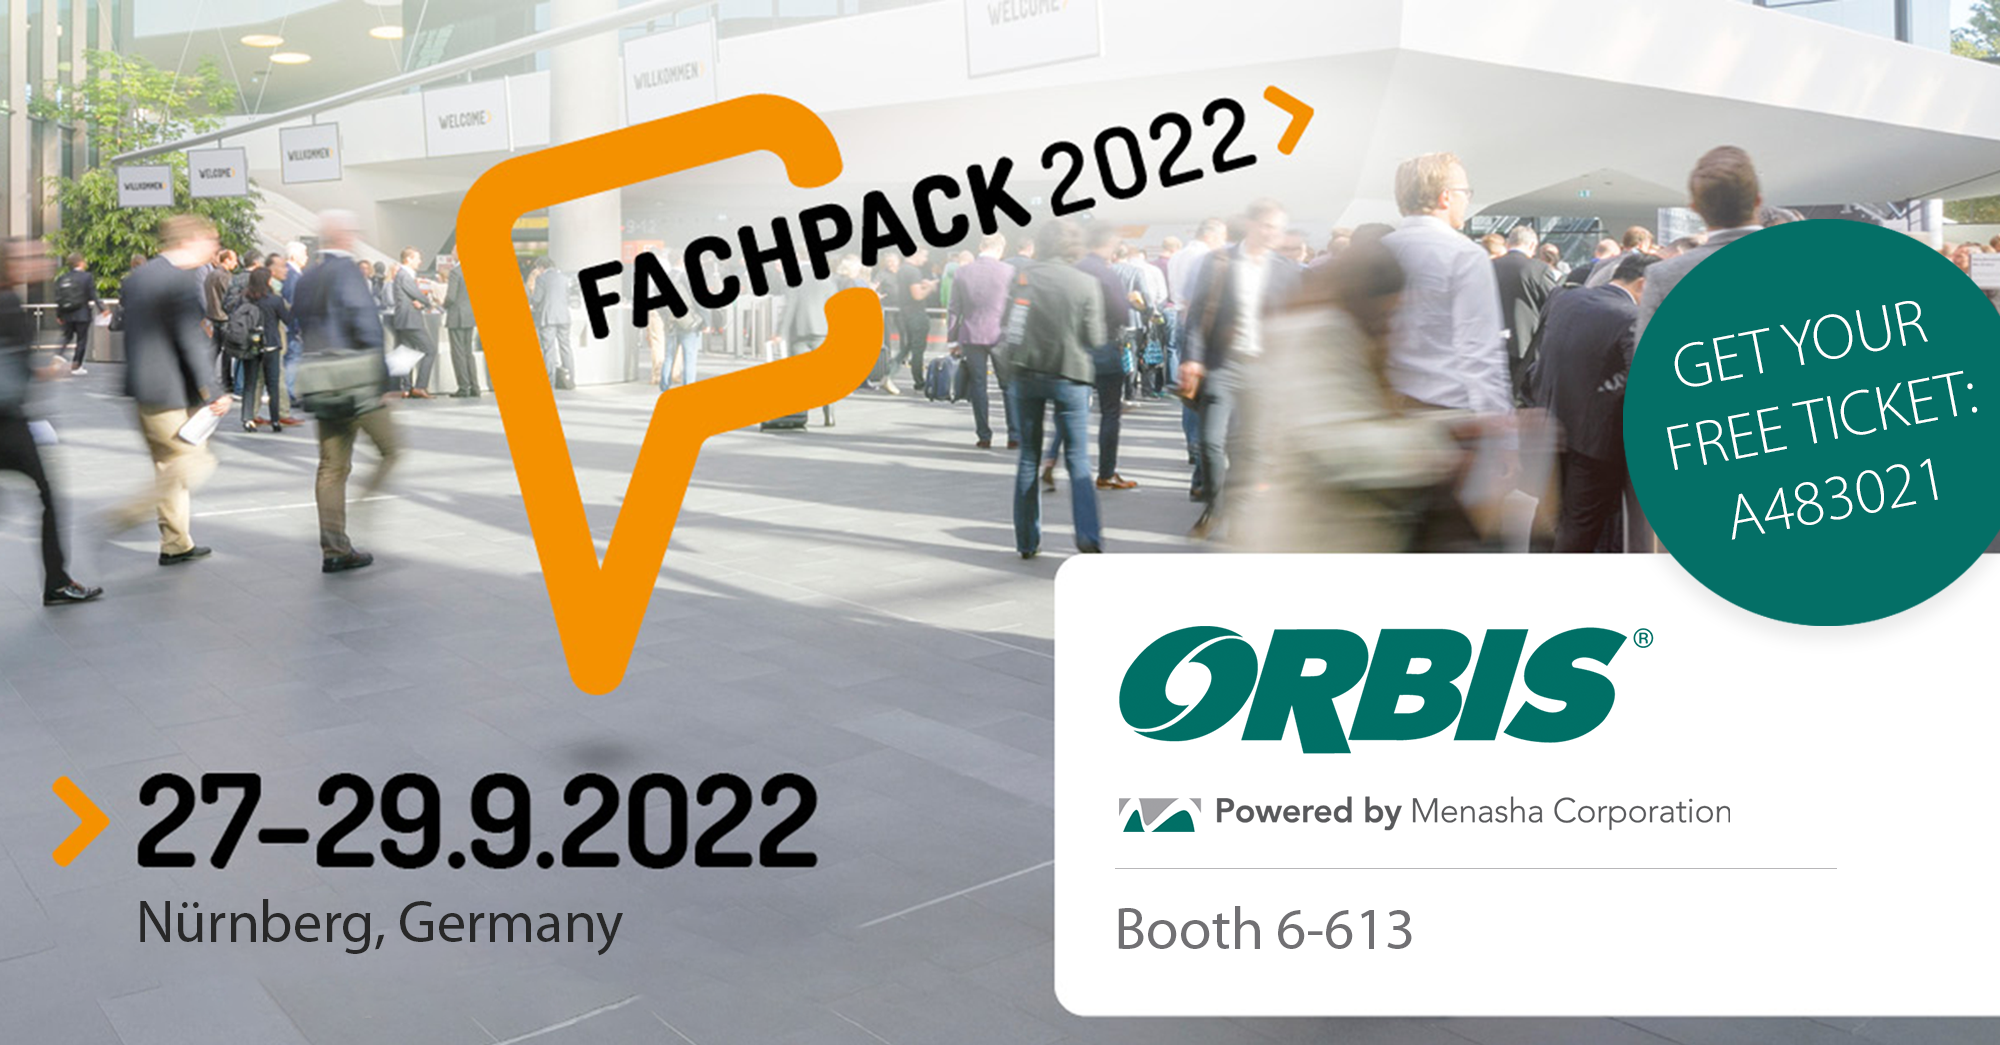 ORBIS at FachPack 2022